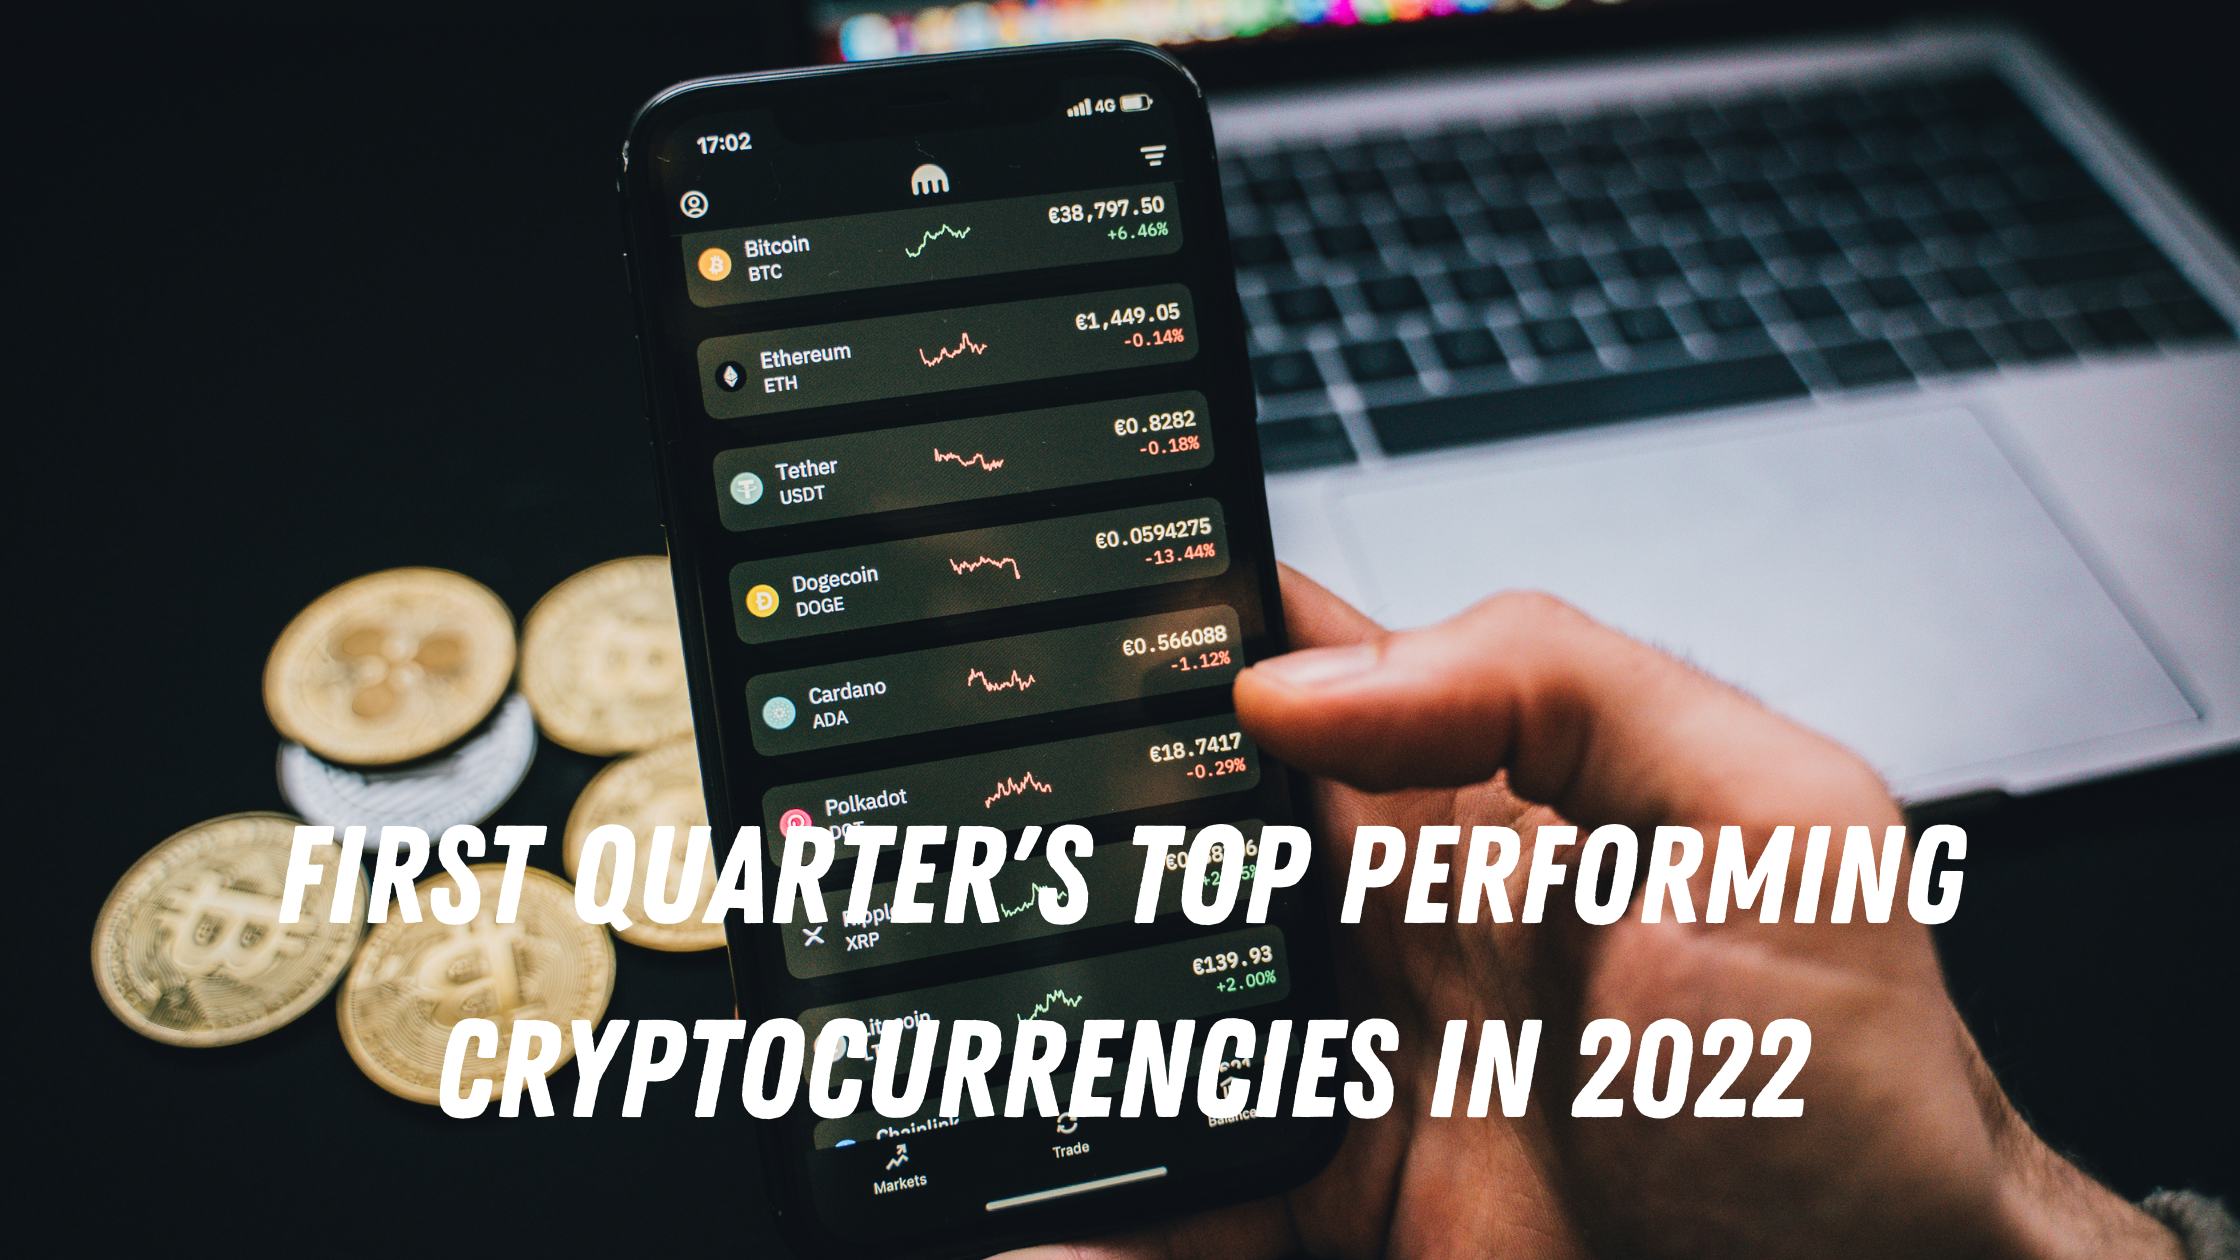 A Look at the First Quarter's Top Performing Cryptocurrencies in 2022